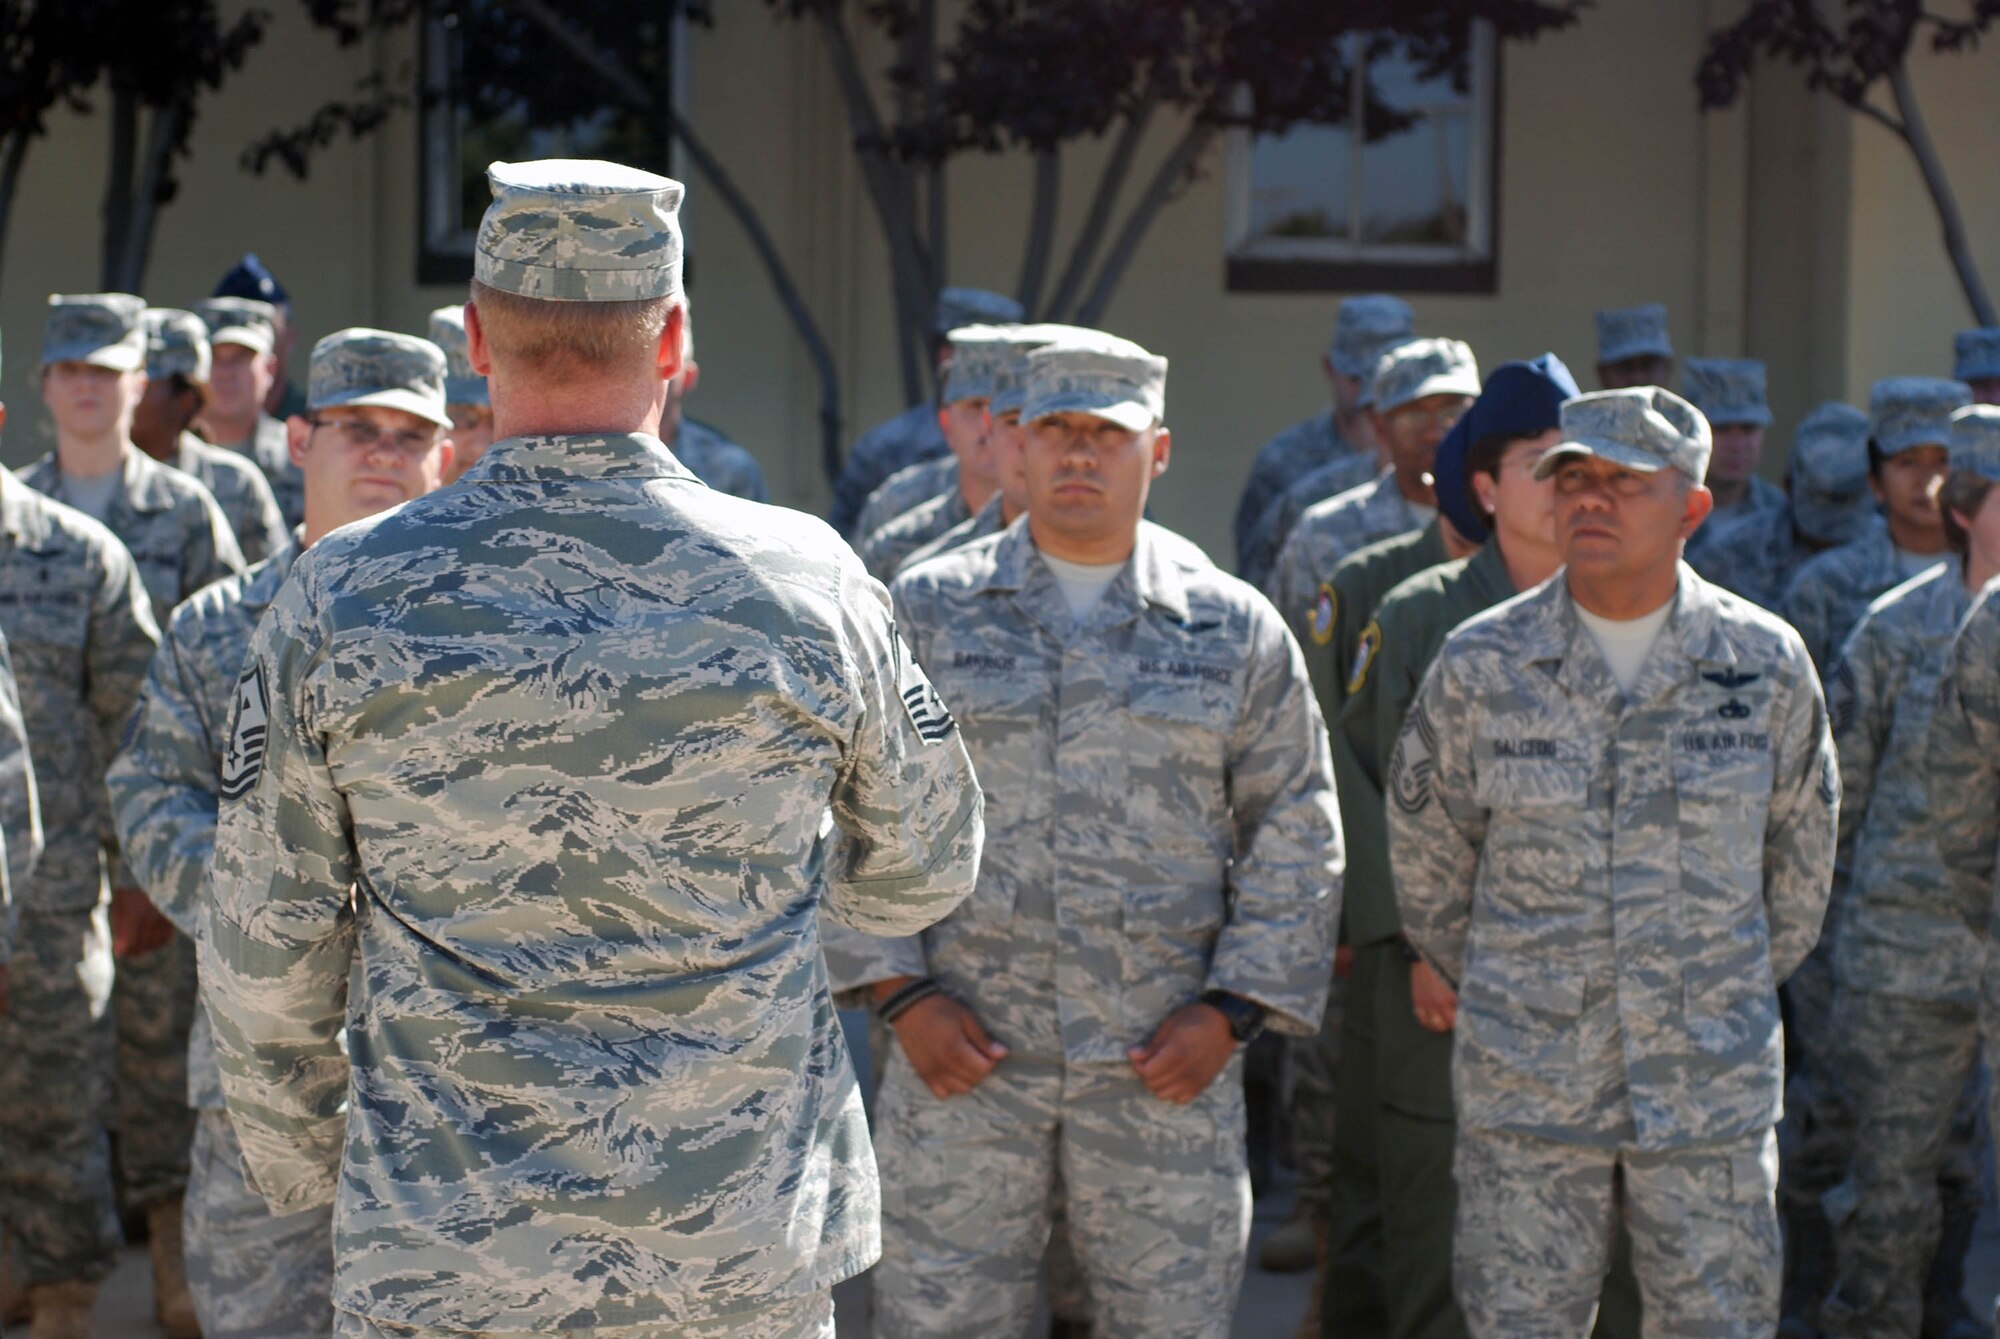 An Airman speaks to the members of a formation in front of the 452nd Air Mobility Wing headquarters building at March Air Reserve Base, Calif., Aug. 21, 2010. (U.S. Air Force photo by Staff Sgt. Kevin Chandler)